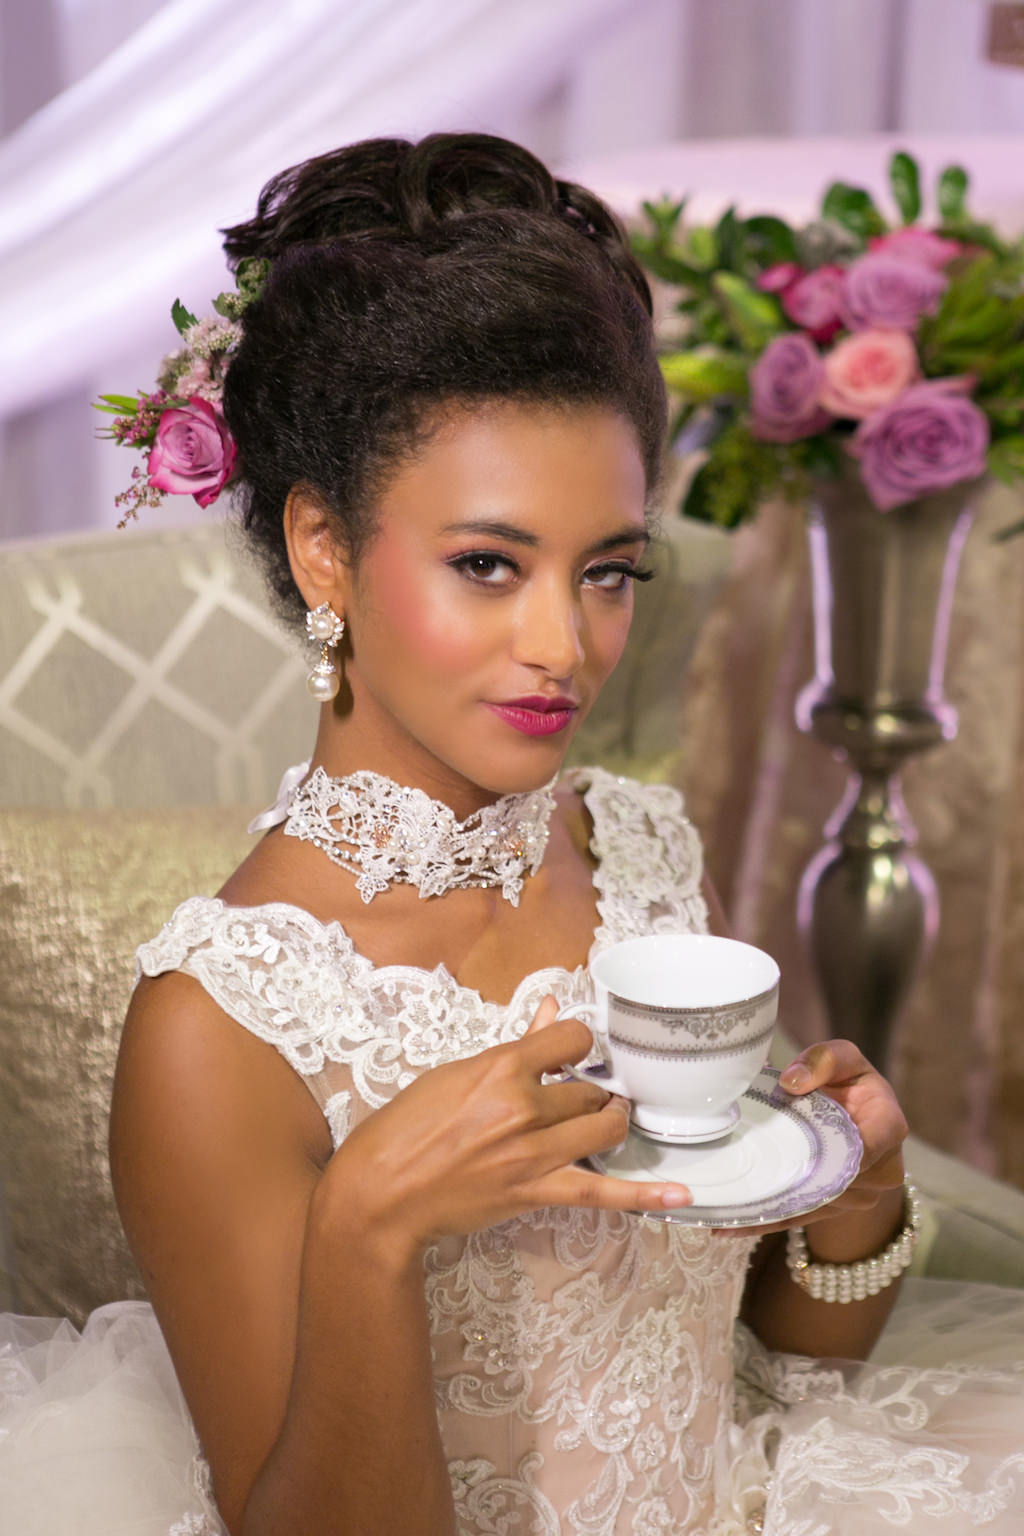 French Inspired Marie Antoinette Bridal Portrait with Teacup and Tropical Pink Rose Hair Flower Accessory and Lace Collar | Tampa Bay Wedding Photographer Carrie Wildes Photography